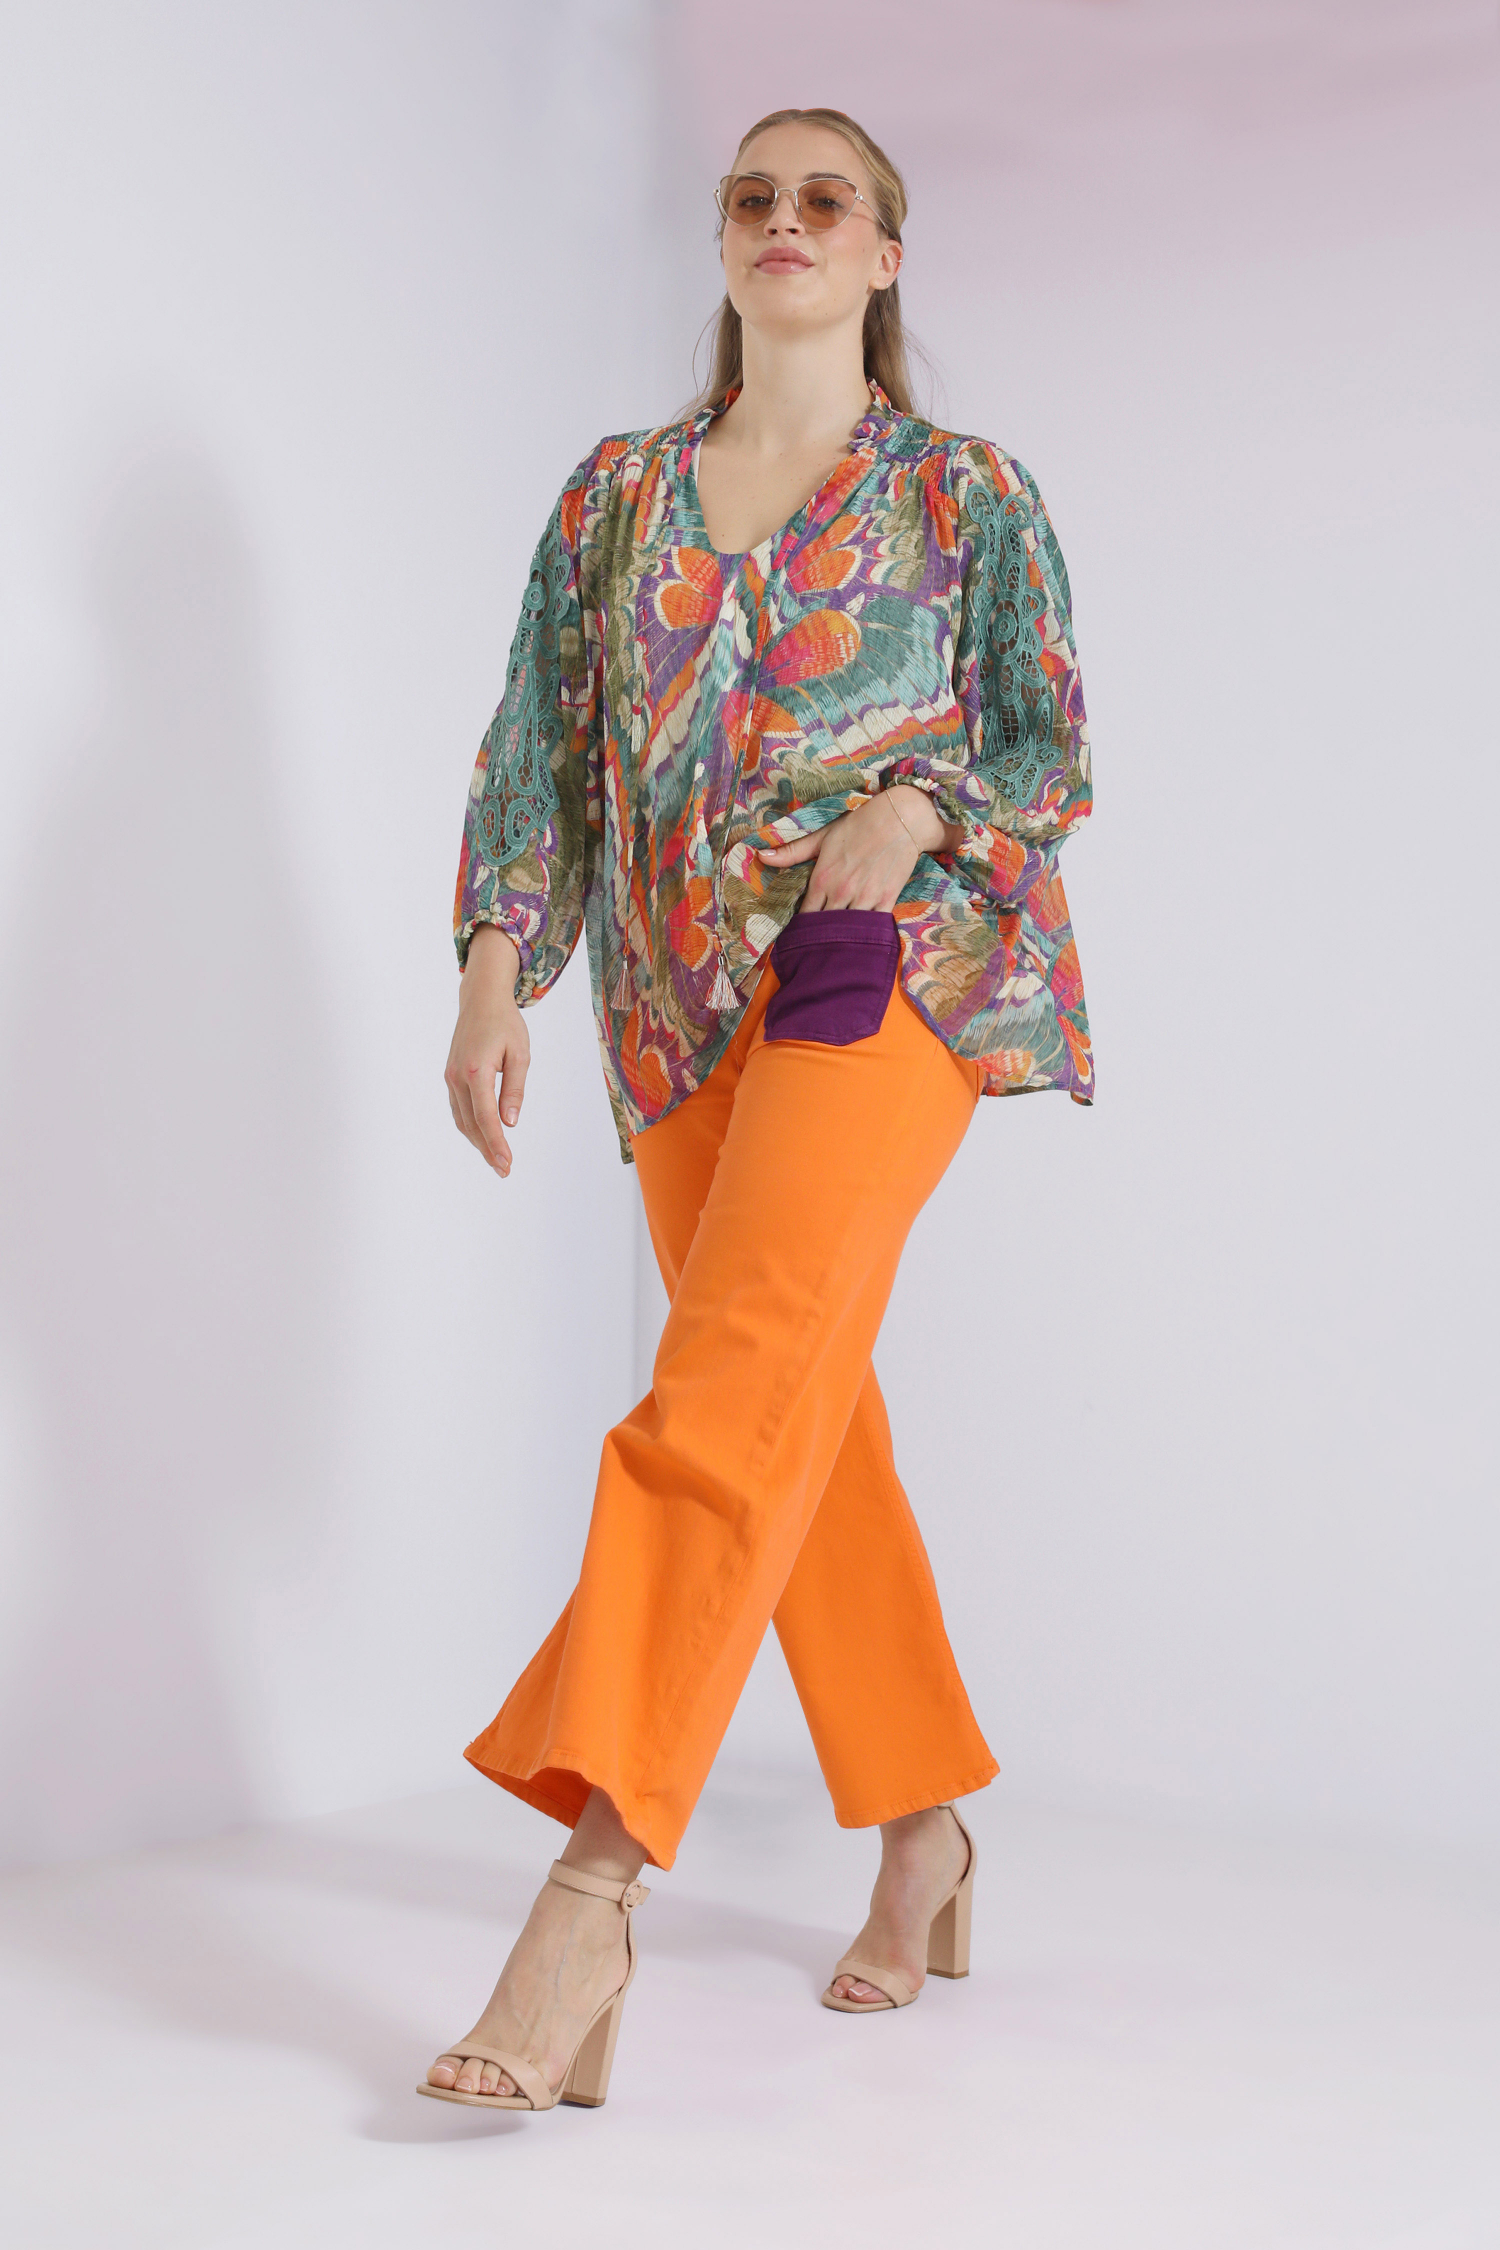 Printed voile blouse lined with a plain top